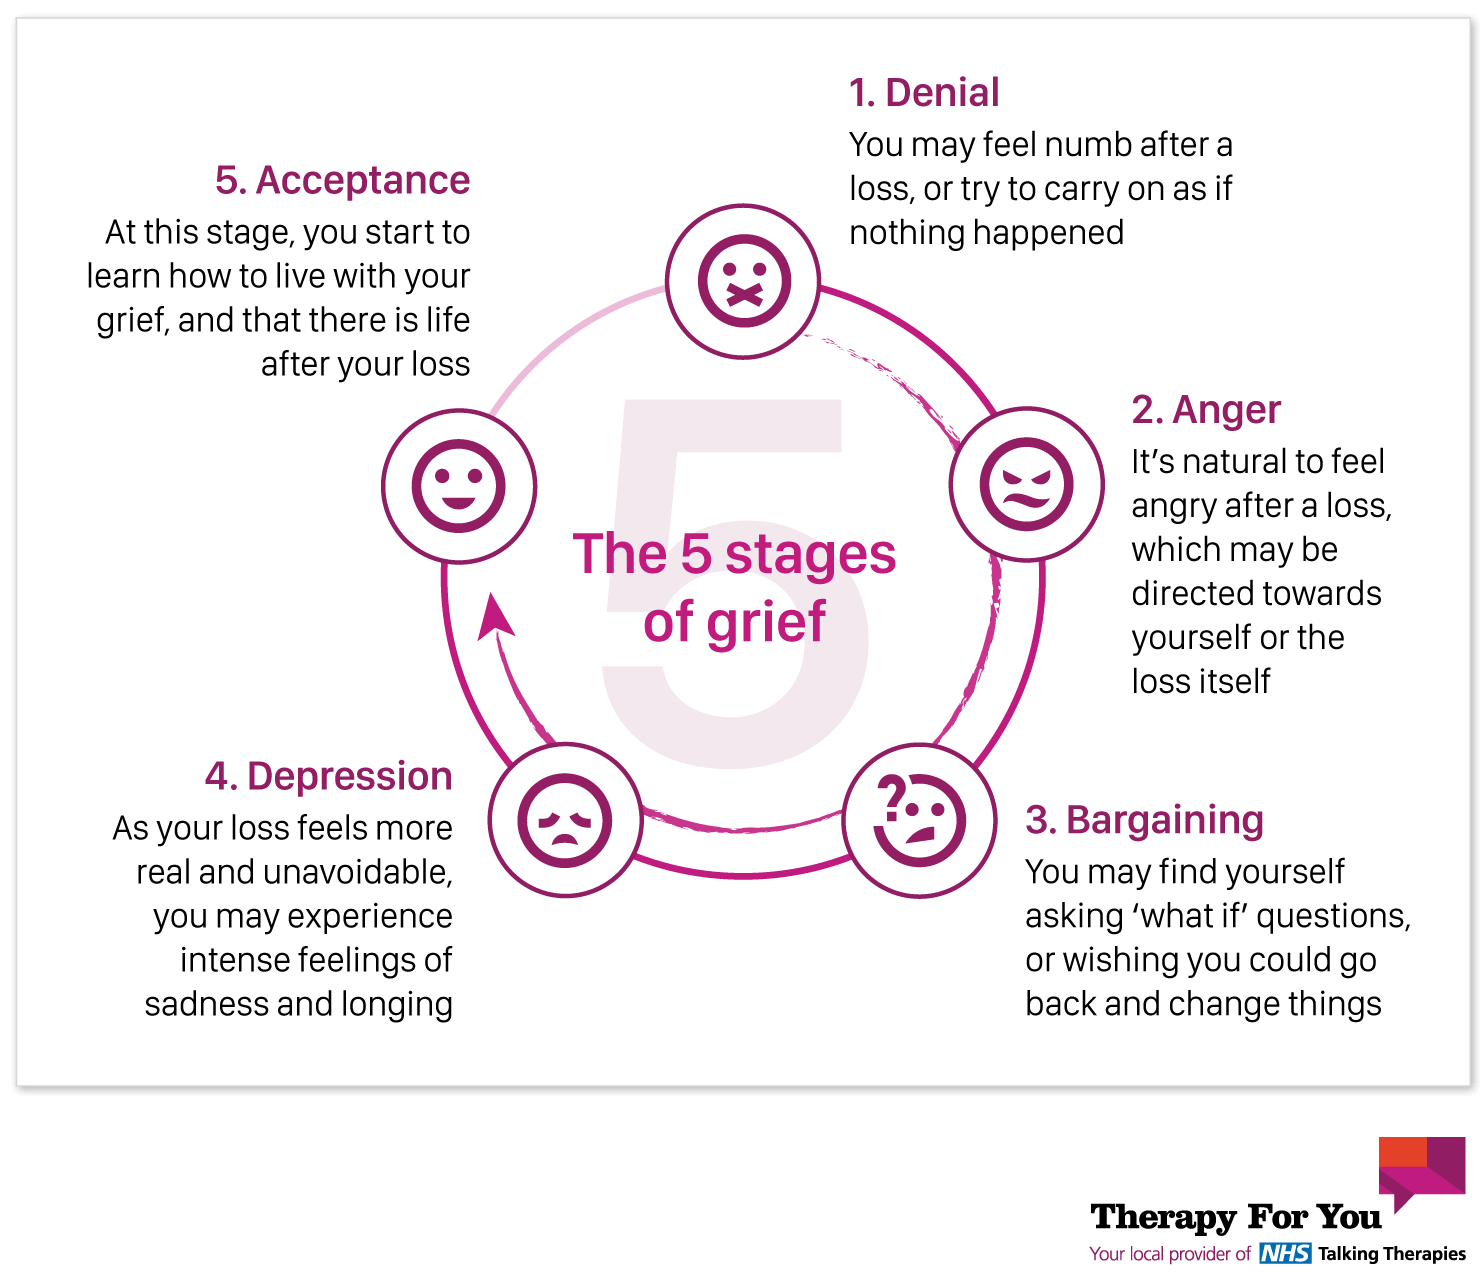 Therapy For You infographic illustrating: The 5 stages of grief. Denial, Anger, Bargaining, Depression and Acceptance